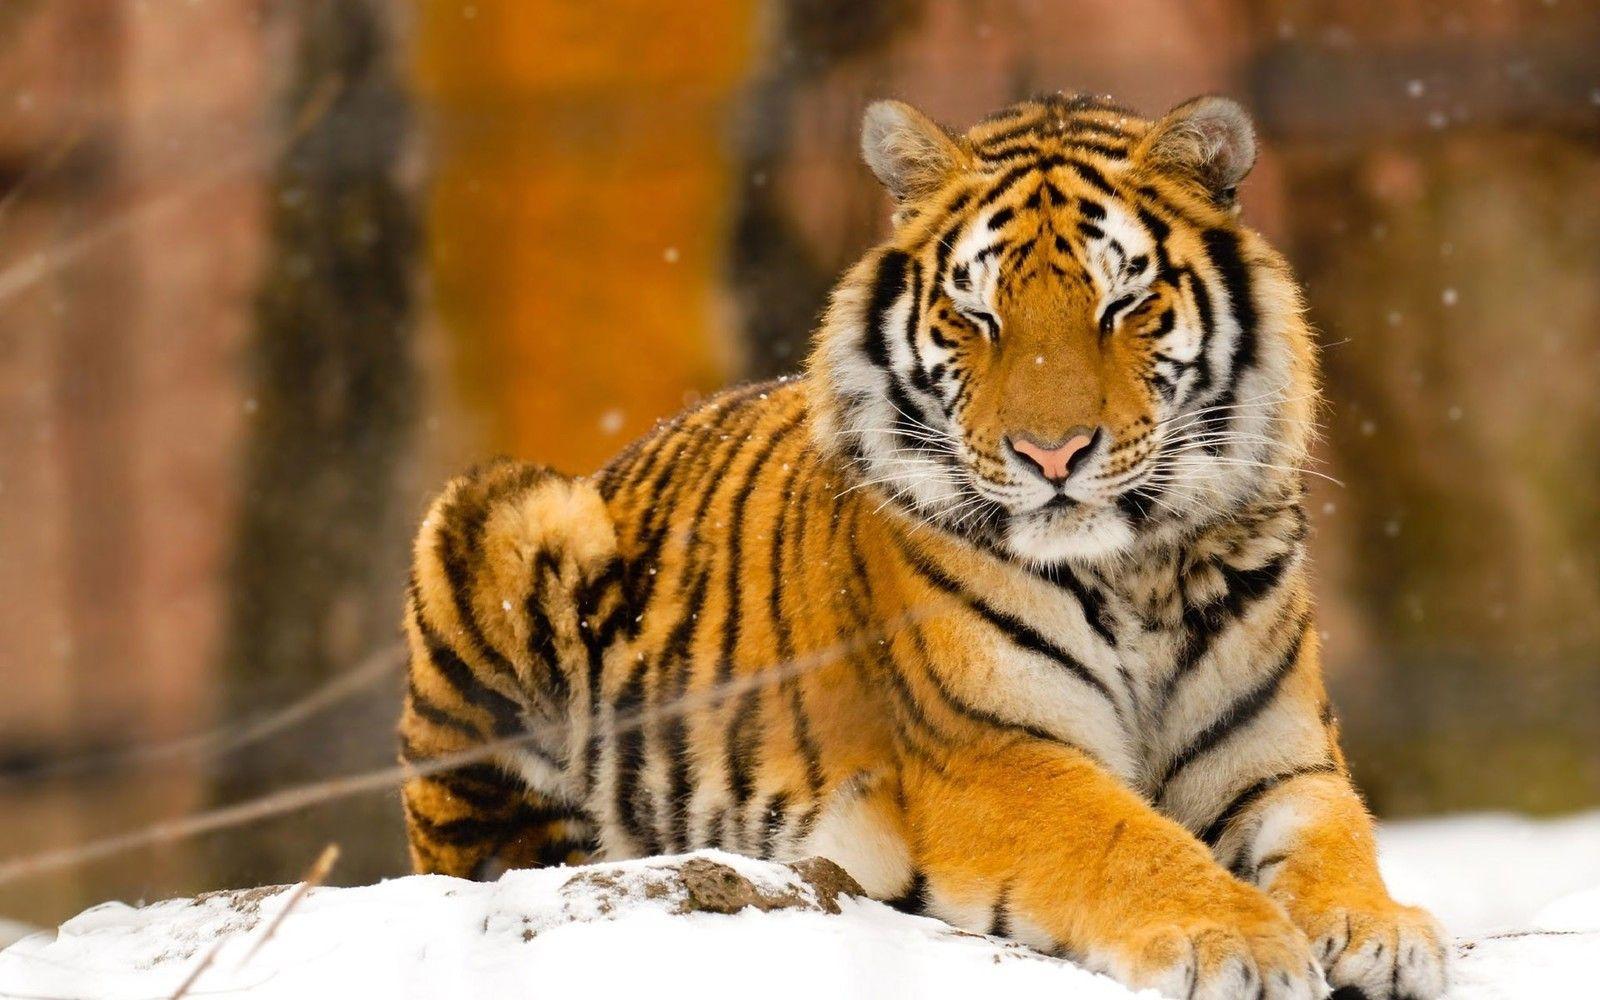 Get your Eye of the Tiger on with these ferocious wallpaper